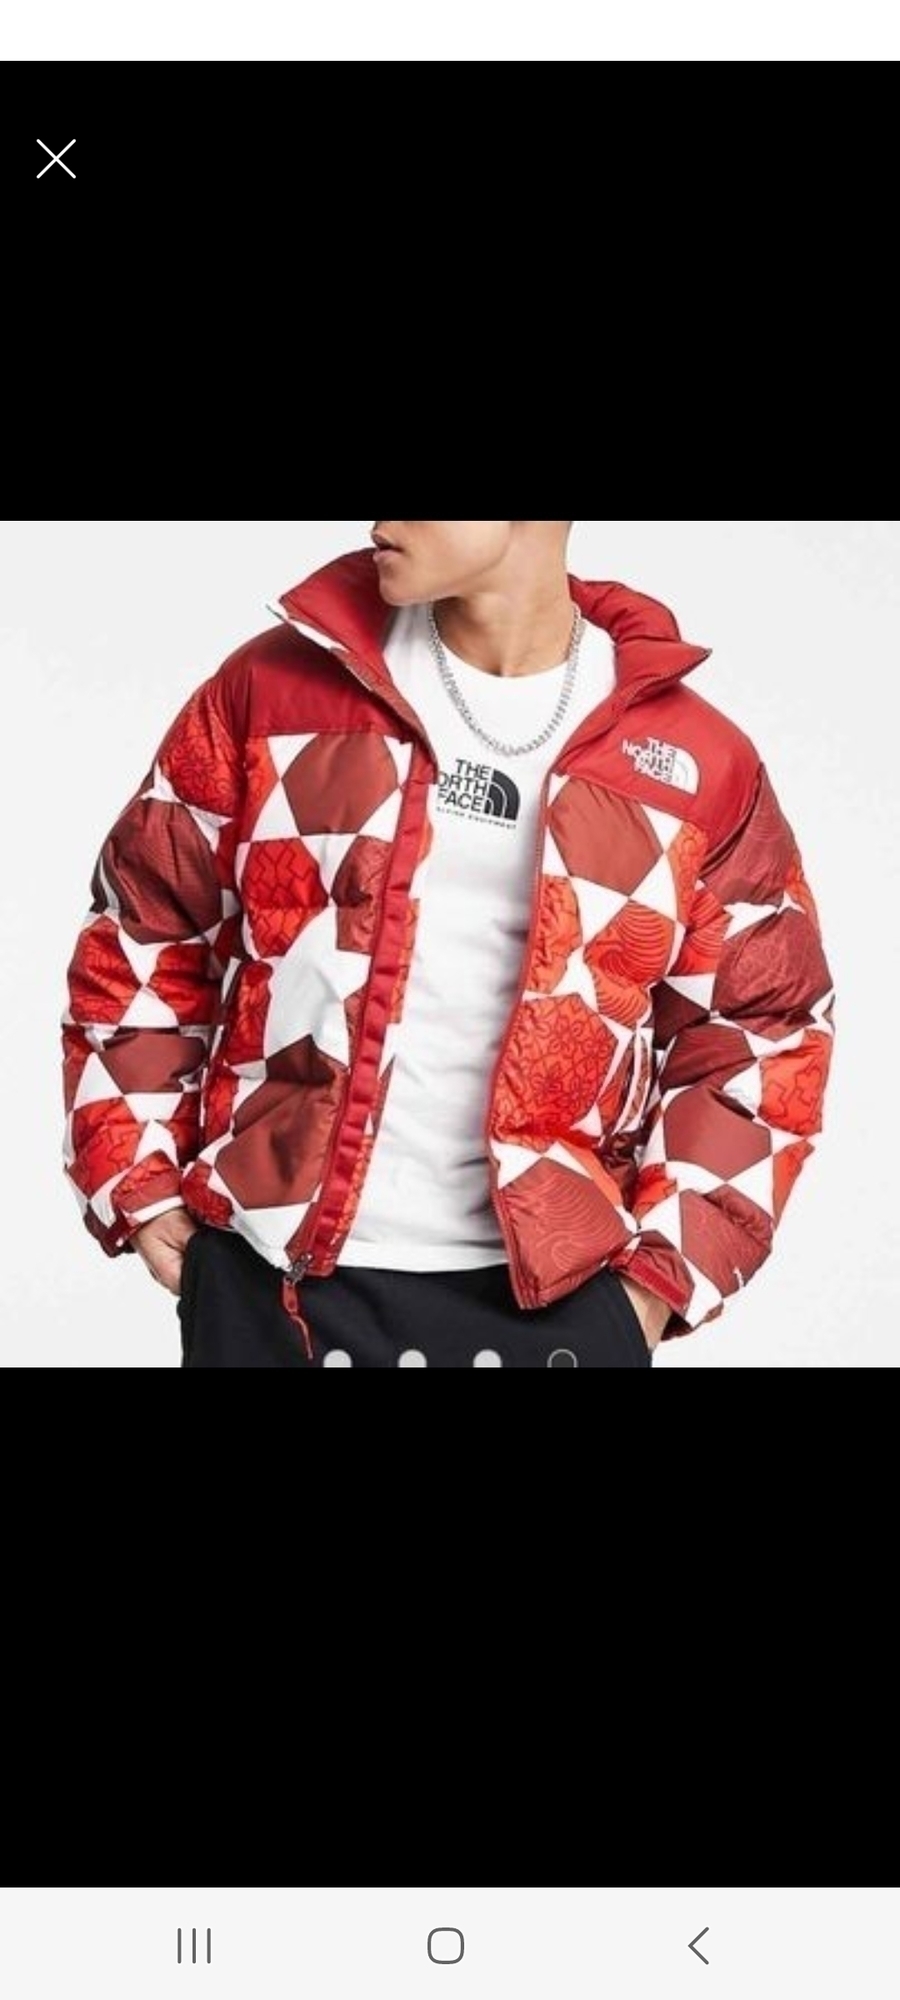 North face 1996 retro print red jacket size M 5